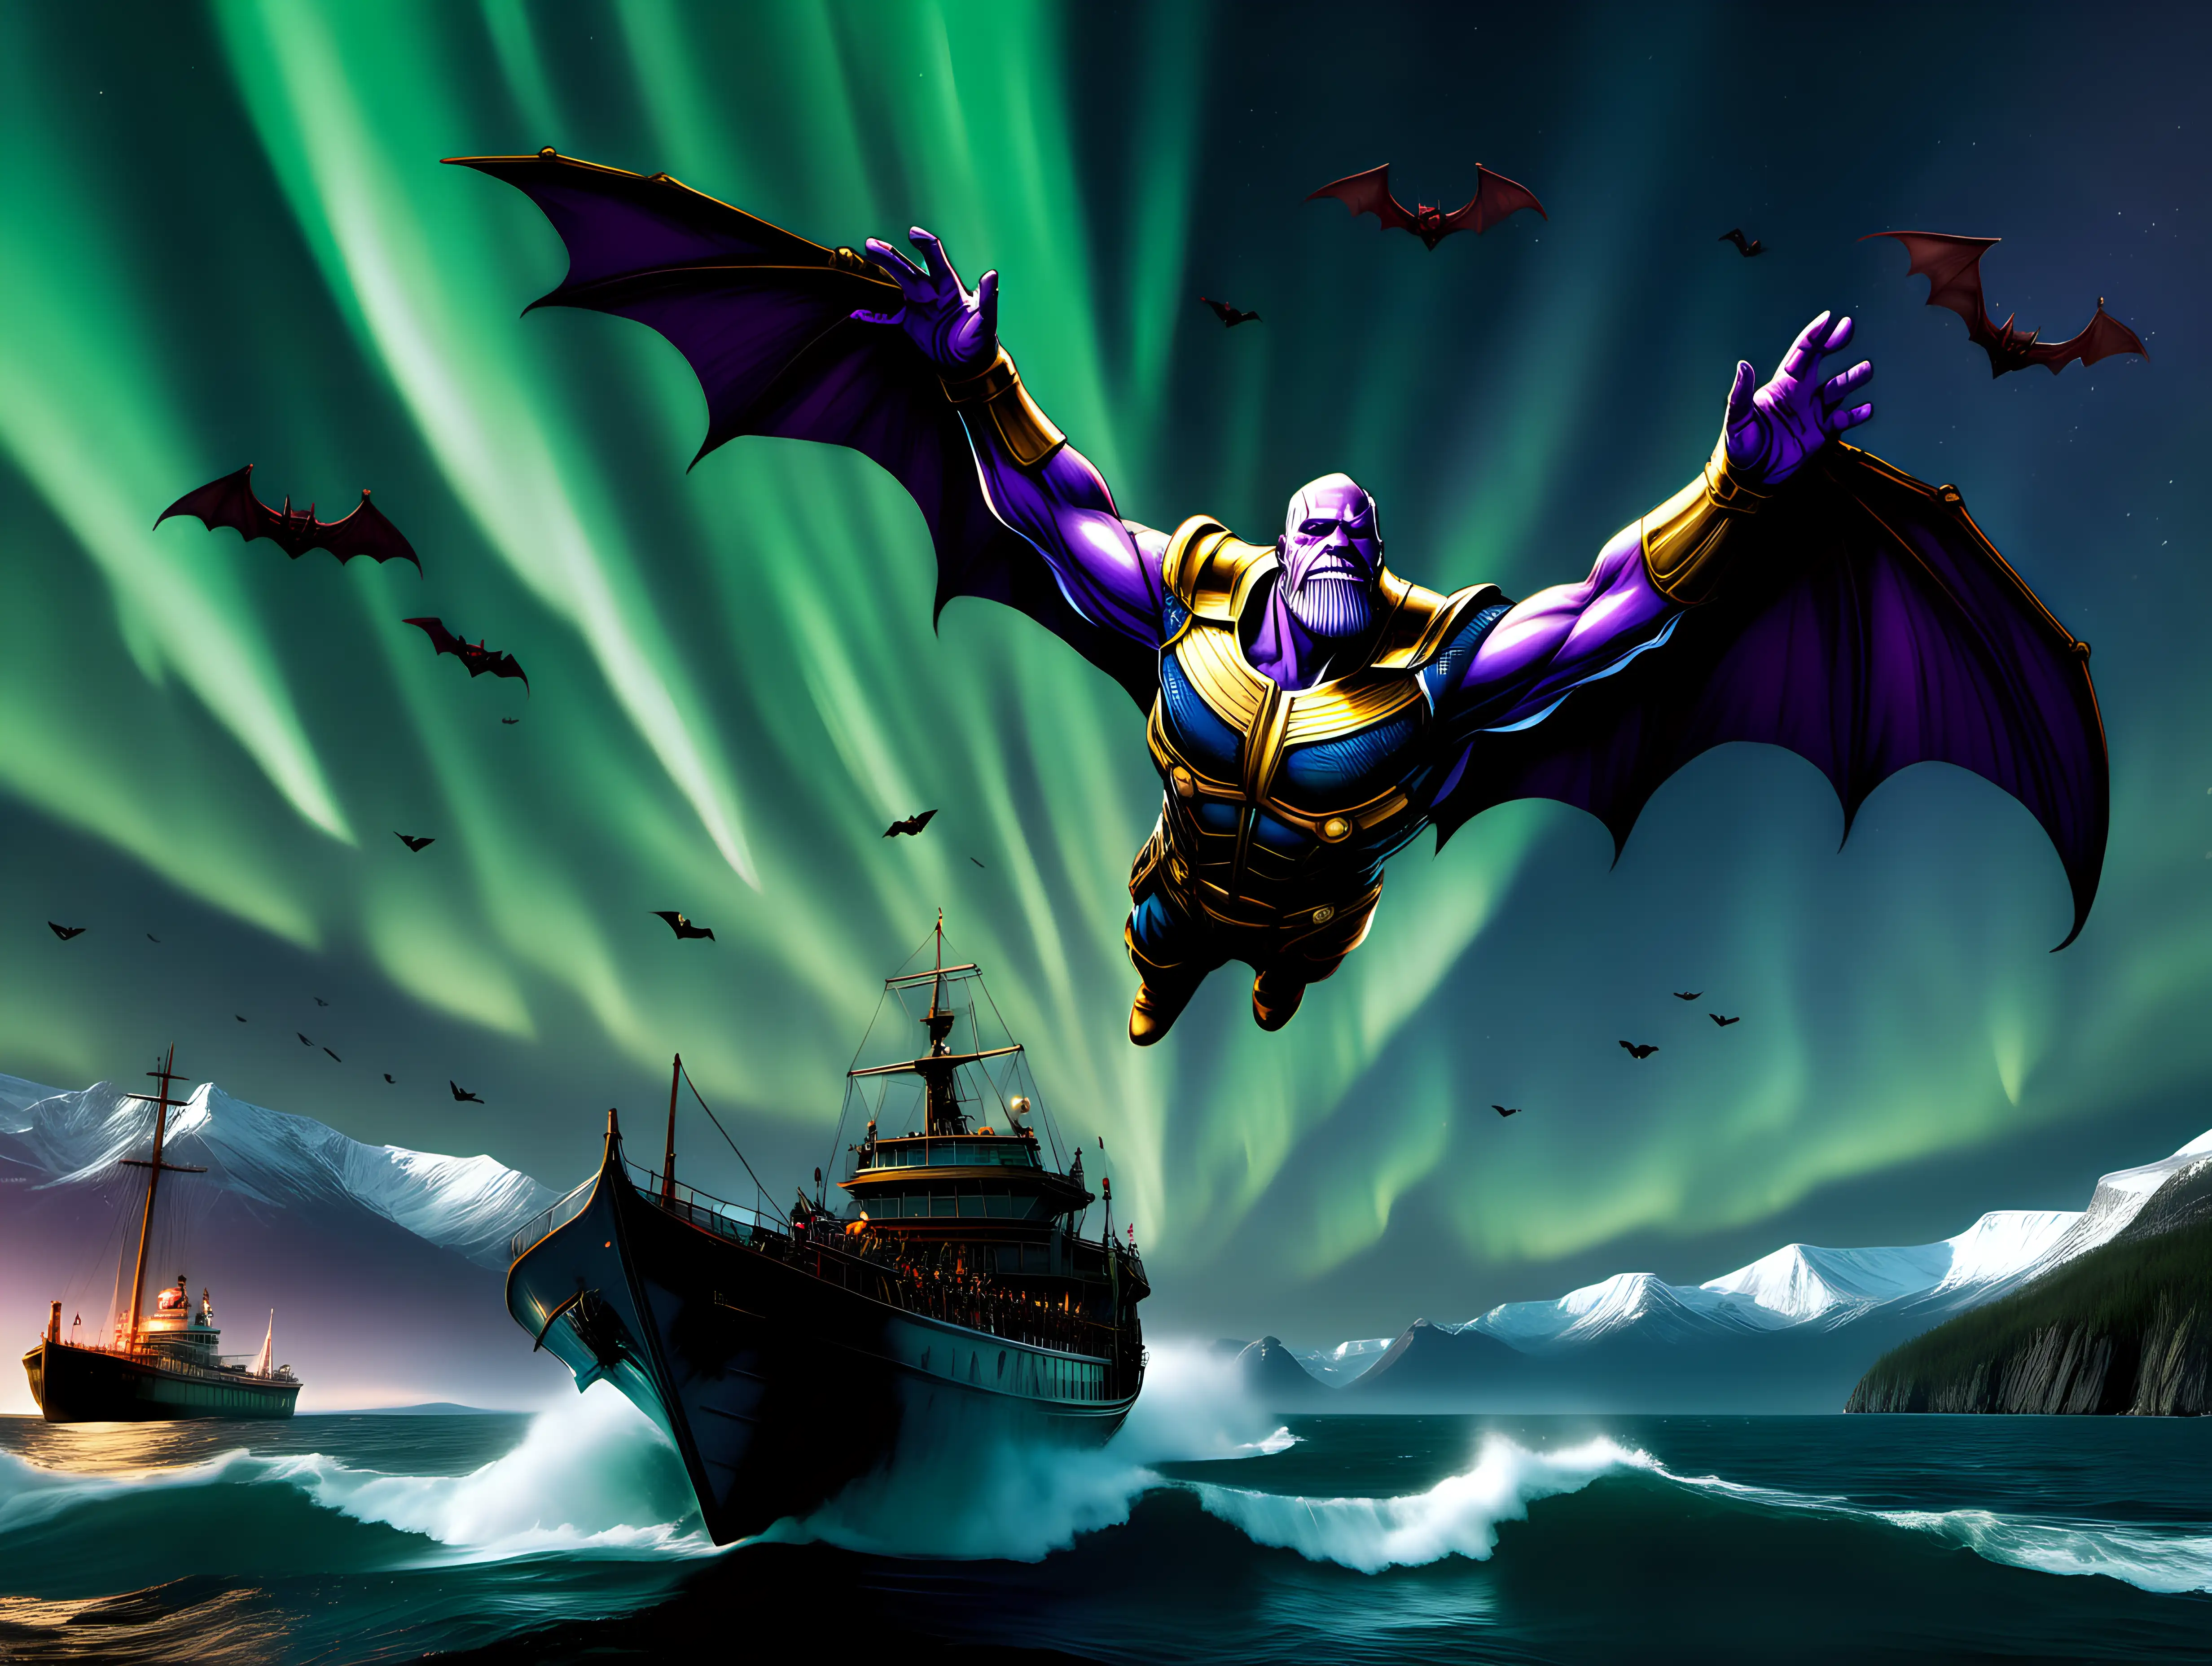 Thanos Emerges in the Sky with Vampire Bats and Sailing Ships Near the Aurora Borealis